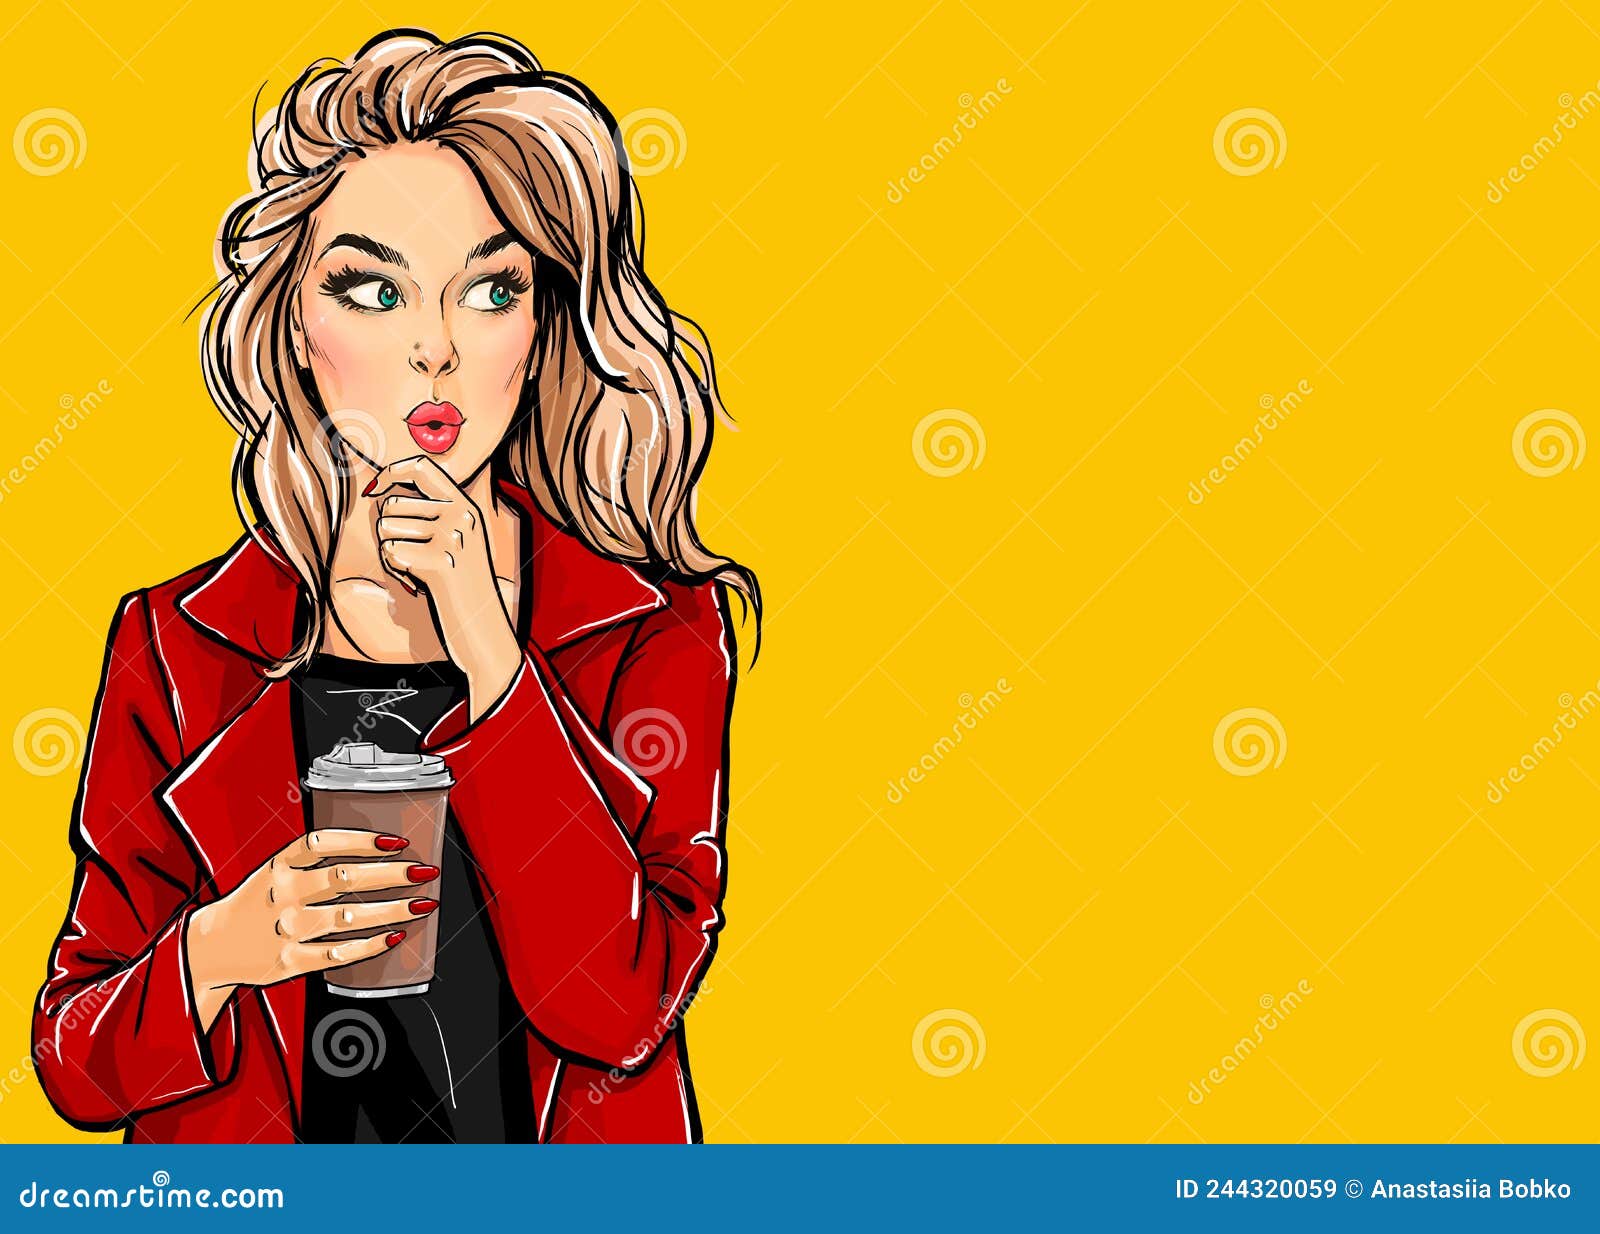 thinking pop art woman with coffee cup. advertising poster or party invitation with sexy girl with amazed face